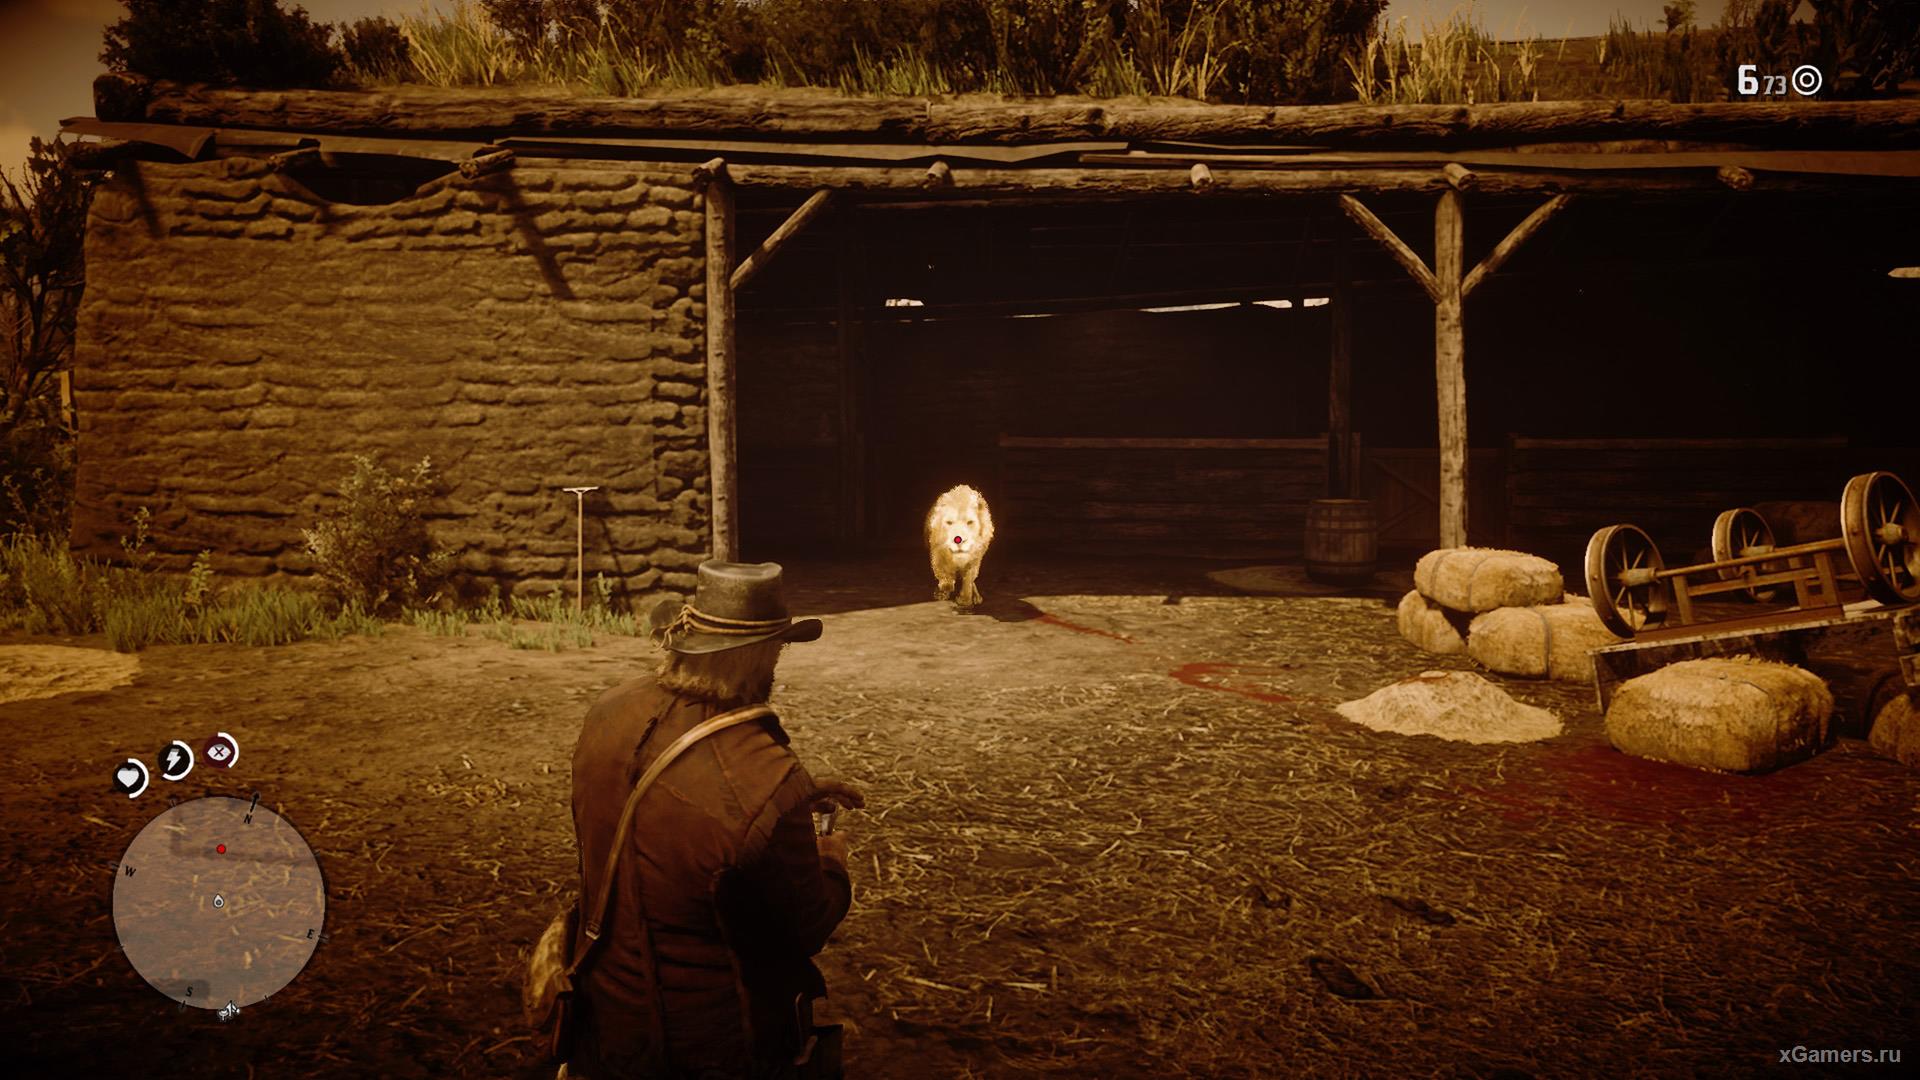 The attack of the lion on Morgan in the game RDR 2